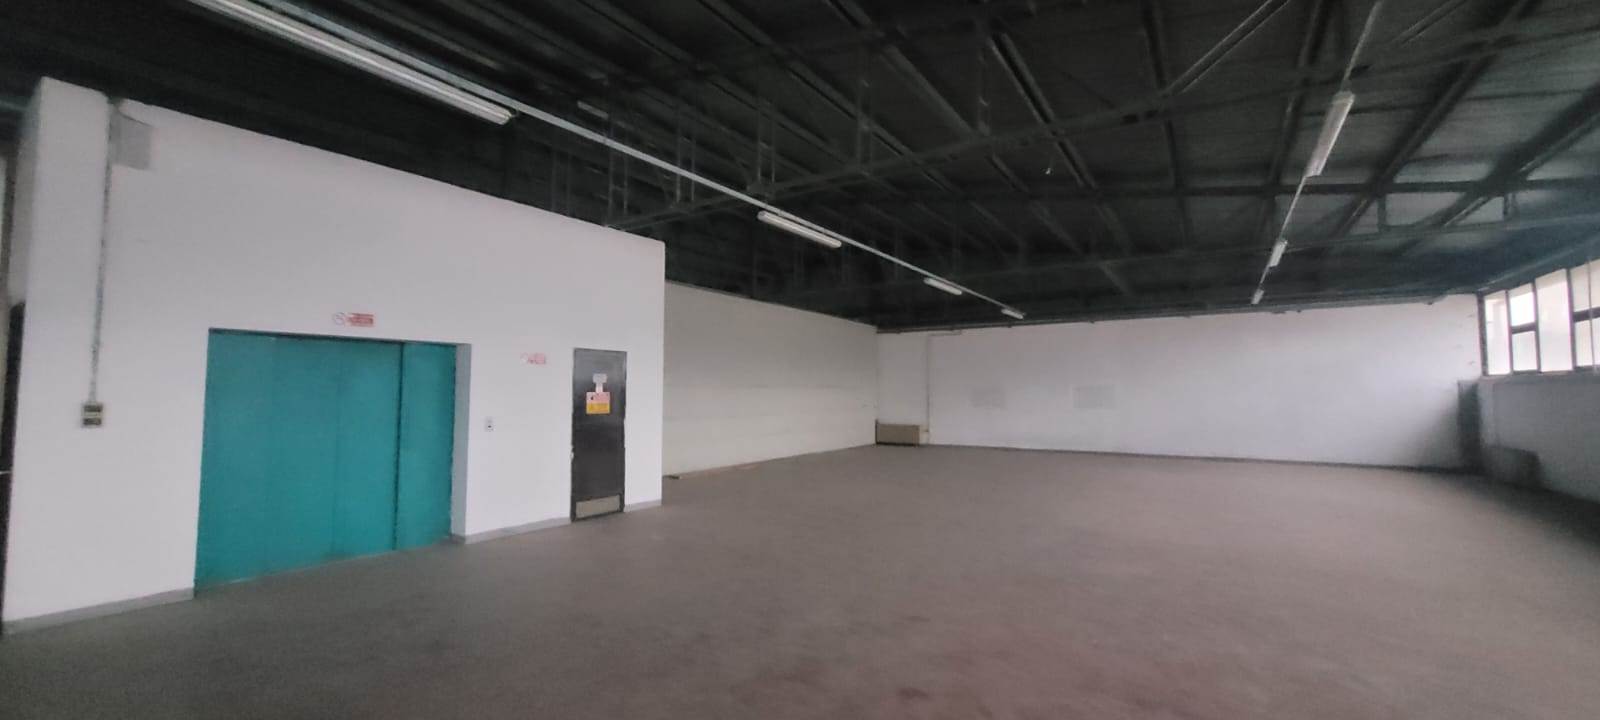 CASCINE DEL RICCIO, FIRENZE, Industrial warehouse for rent of 550 Sq. mt., Habitable, Heating Individual heating system, Energetic class: G, Epi: 2 